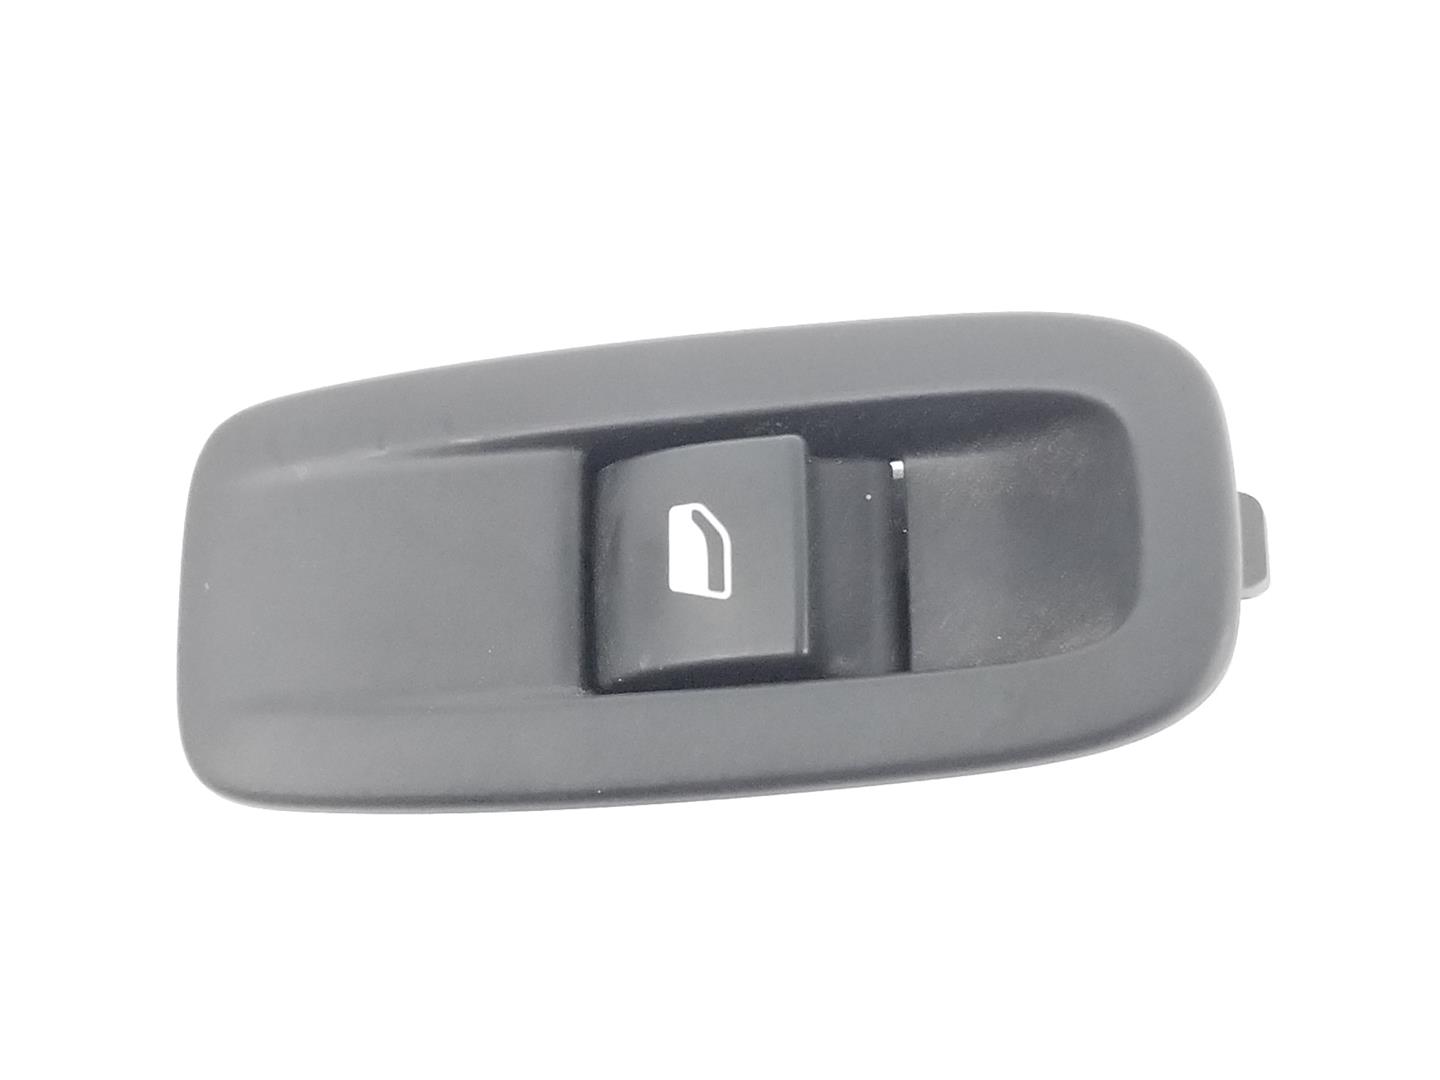 CITROËN C4 Picasso 2 generation (2013-2018) Rear Right Door Window Control Switch 98044803ZD, 96762292ZD 19788459